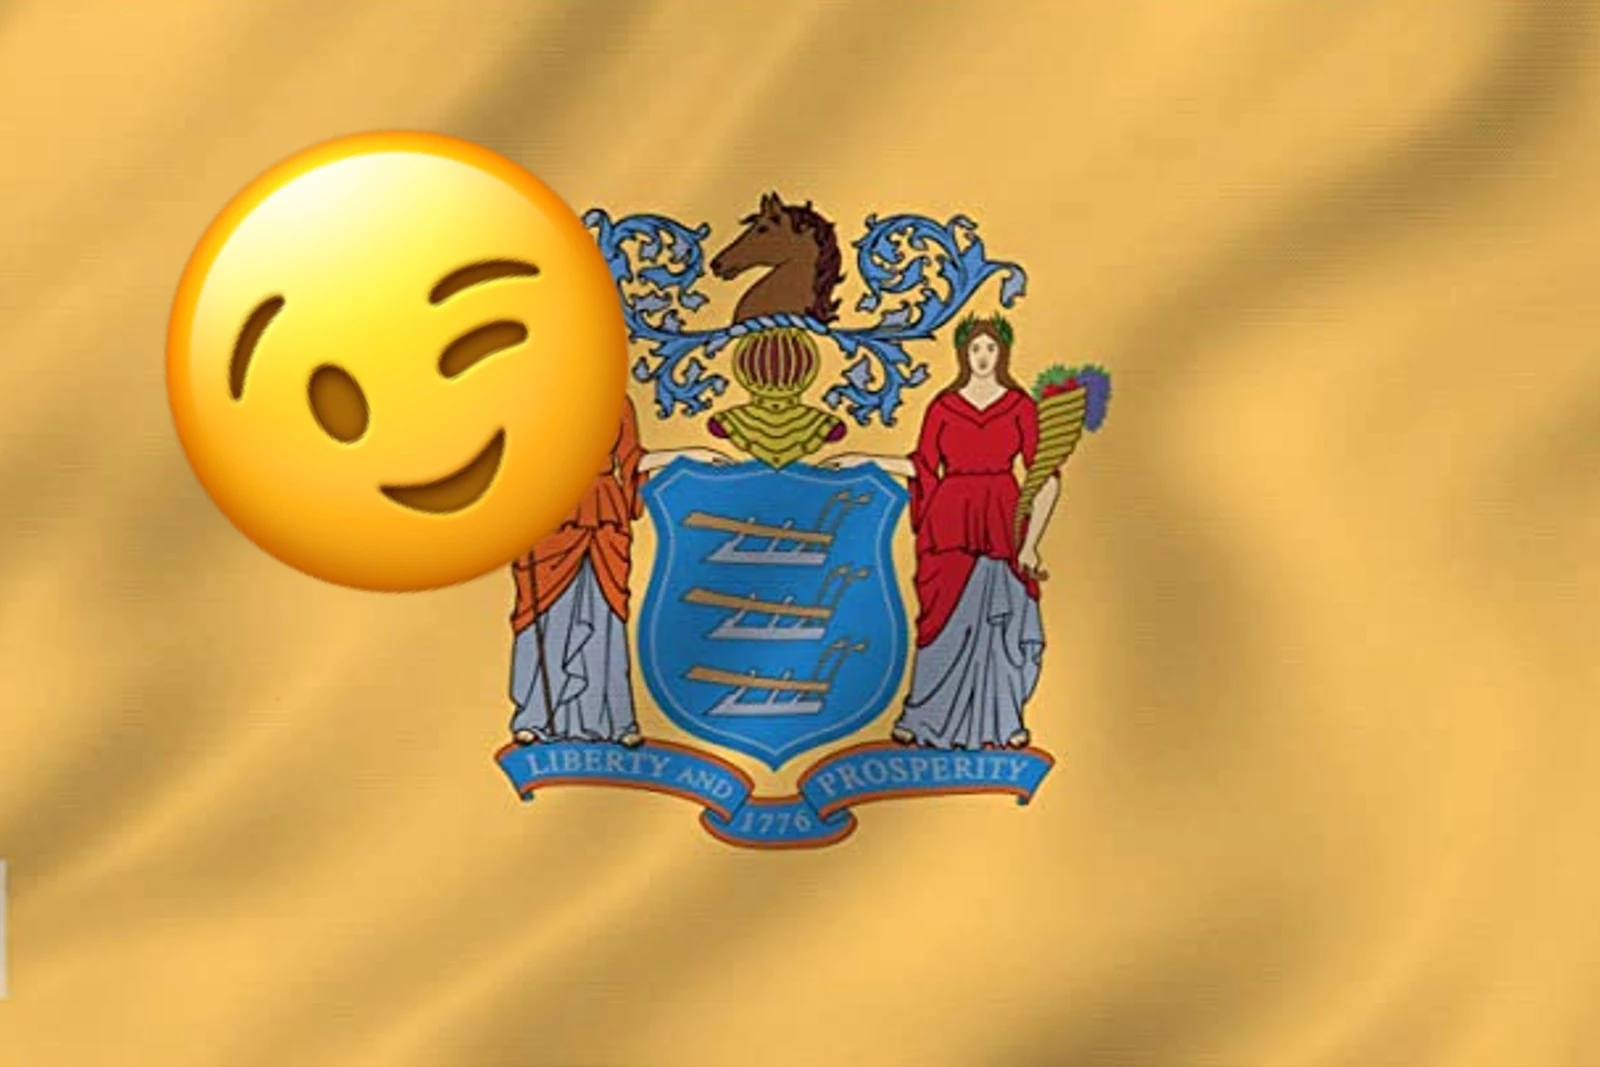 We redesigned the NJ state flag and we weren't sarcastic one bit